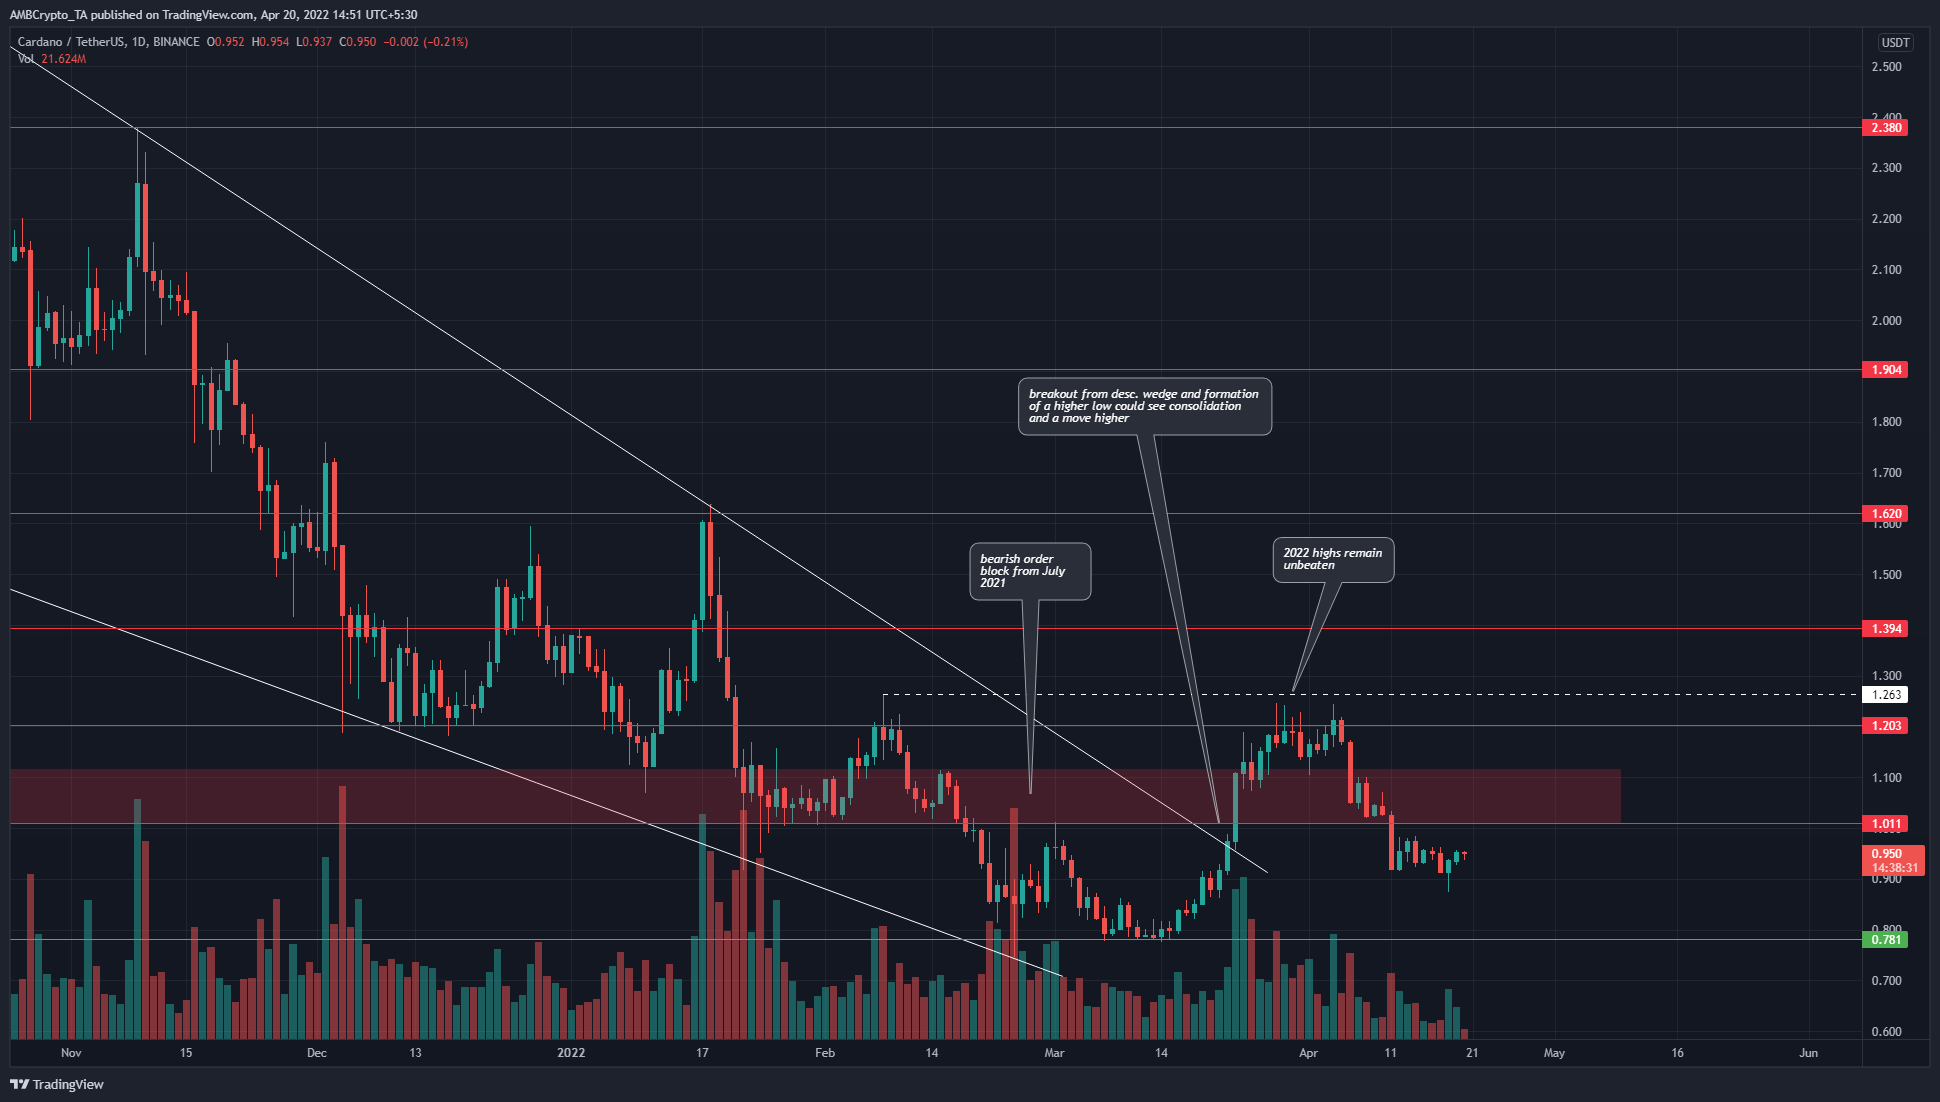 Cardano breaks out of a bullish reversal pattern but continued to toil within a bearish structure